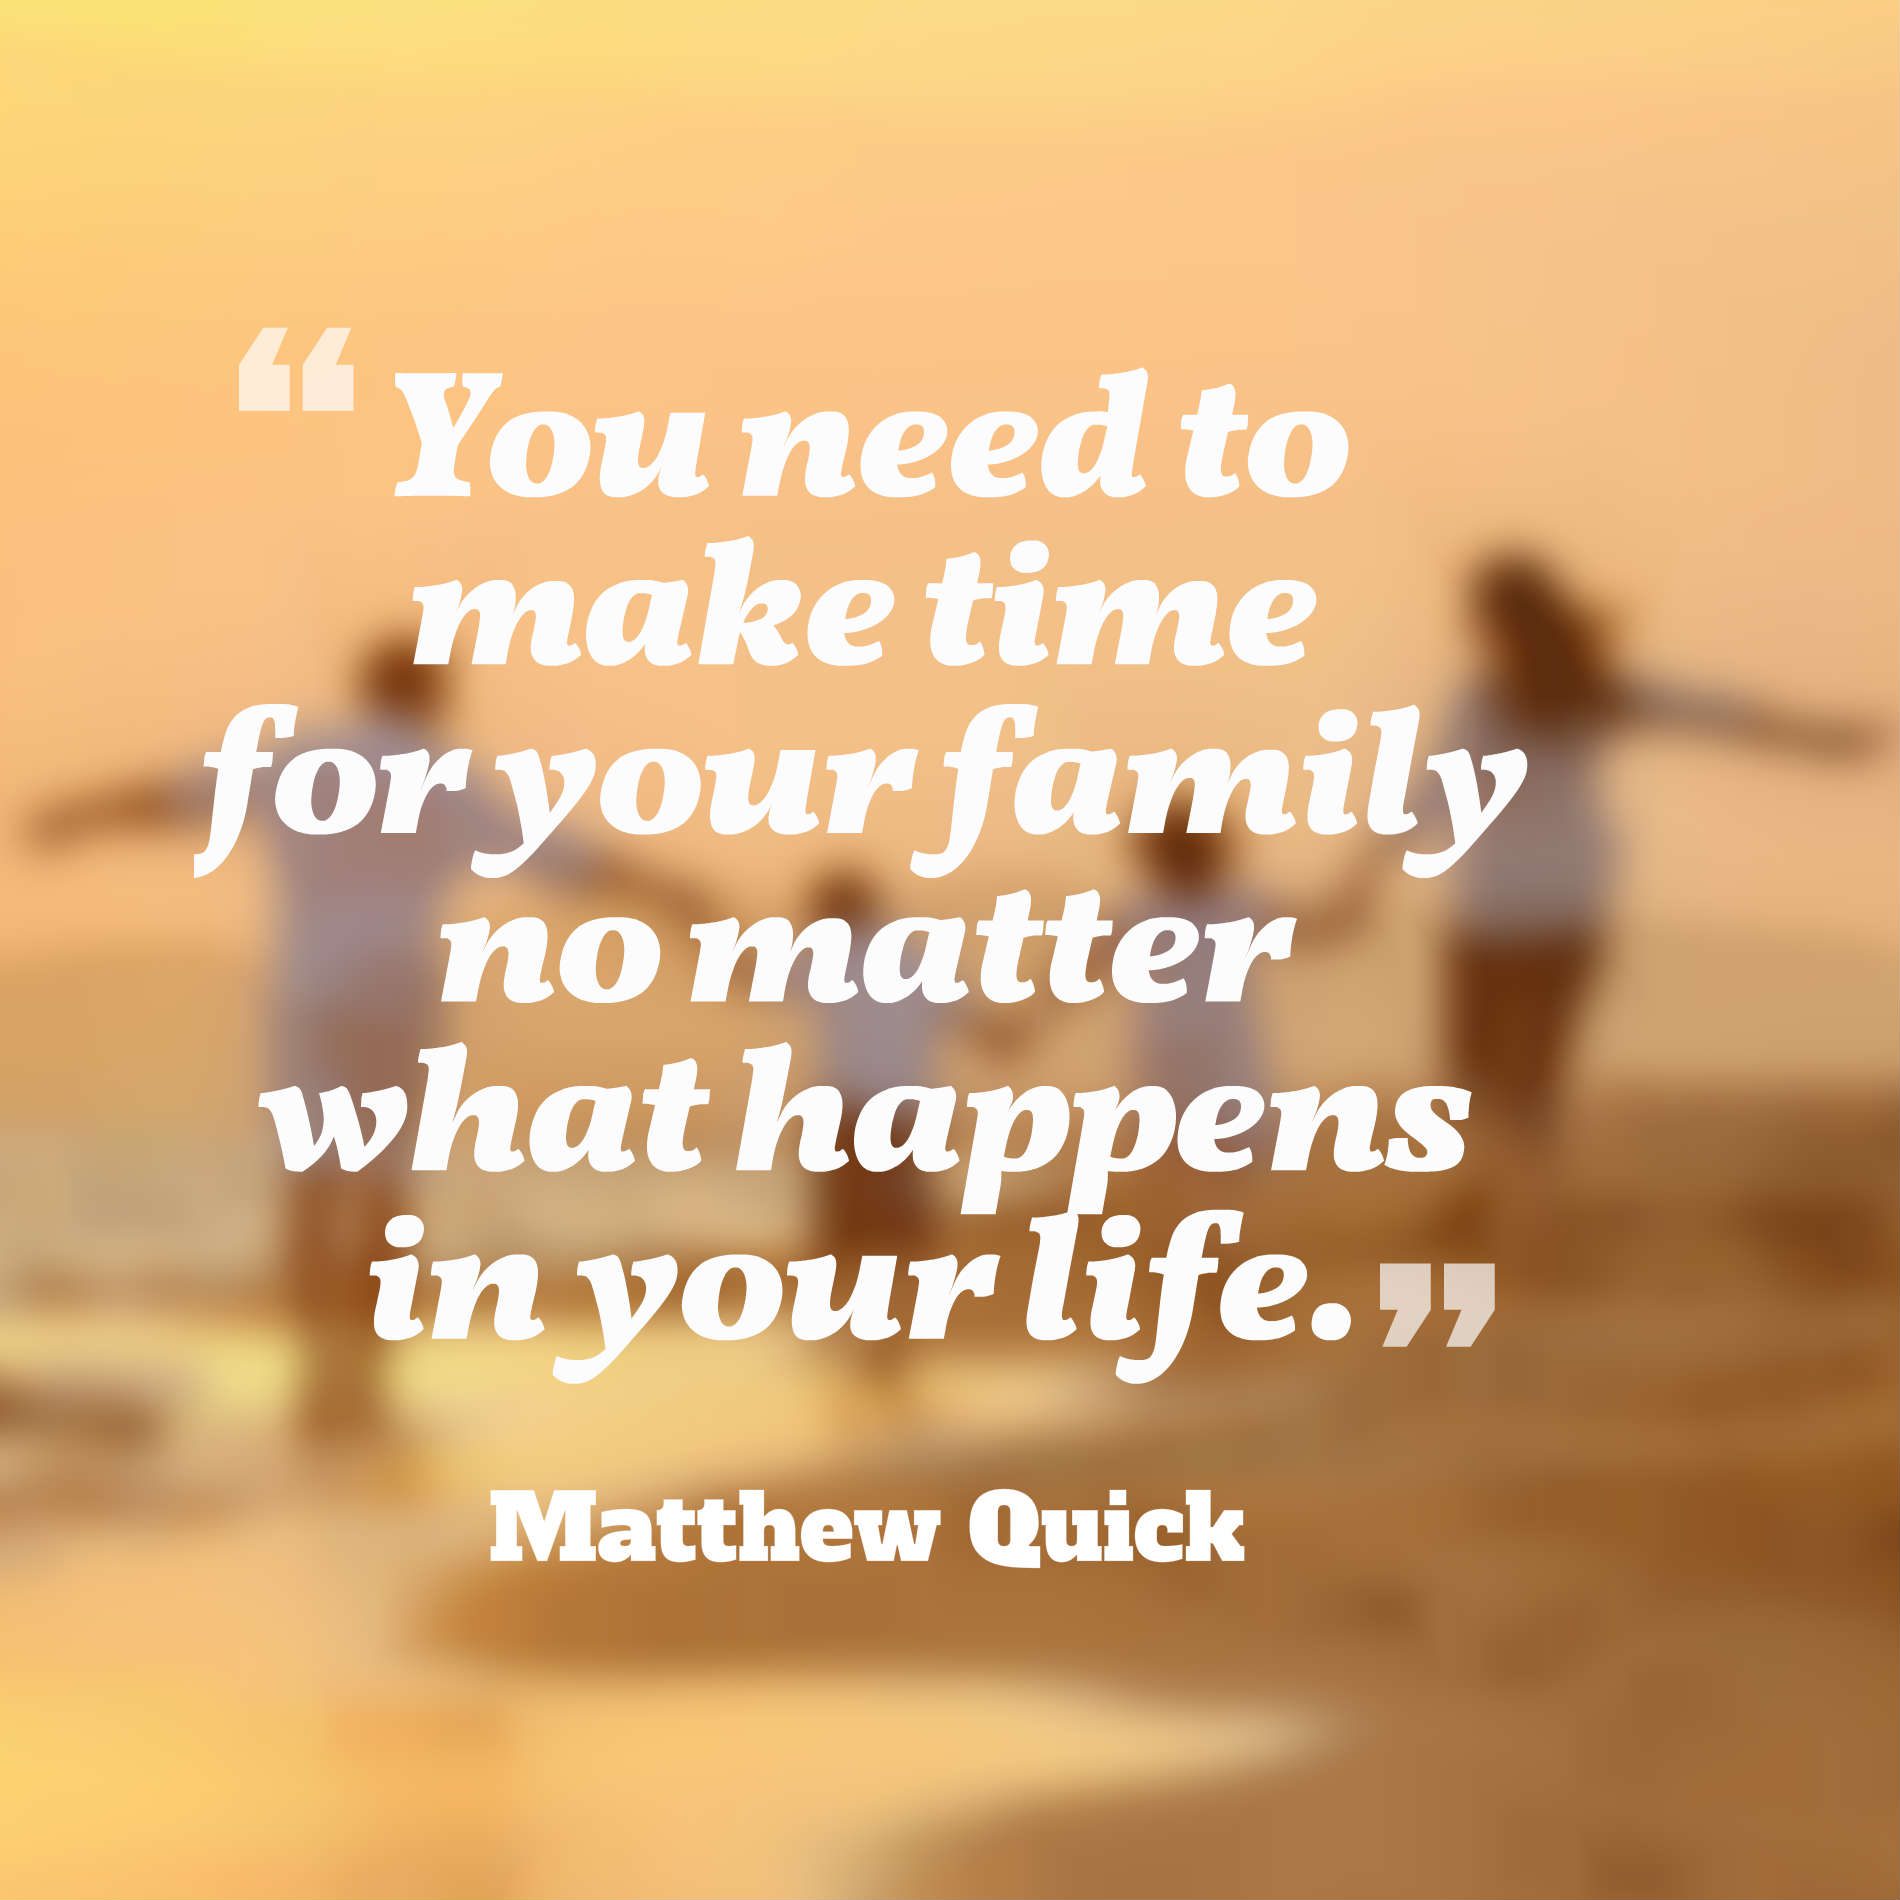 You need to make time for your family no matter what happens in your life